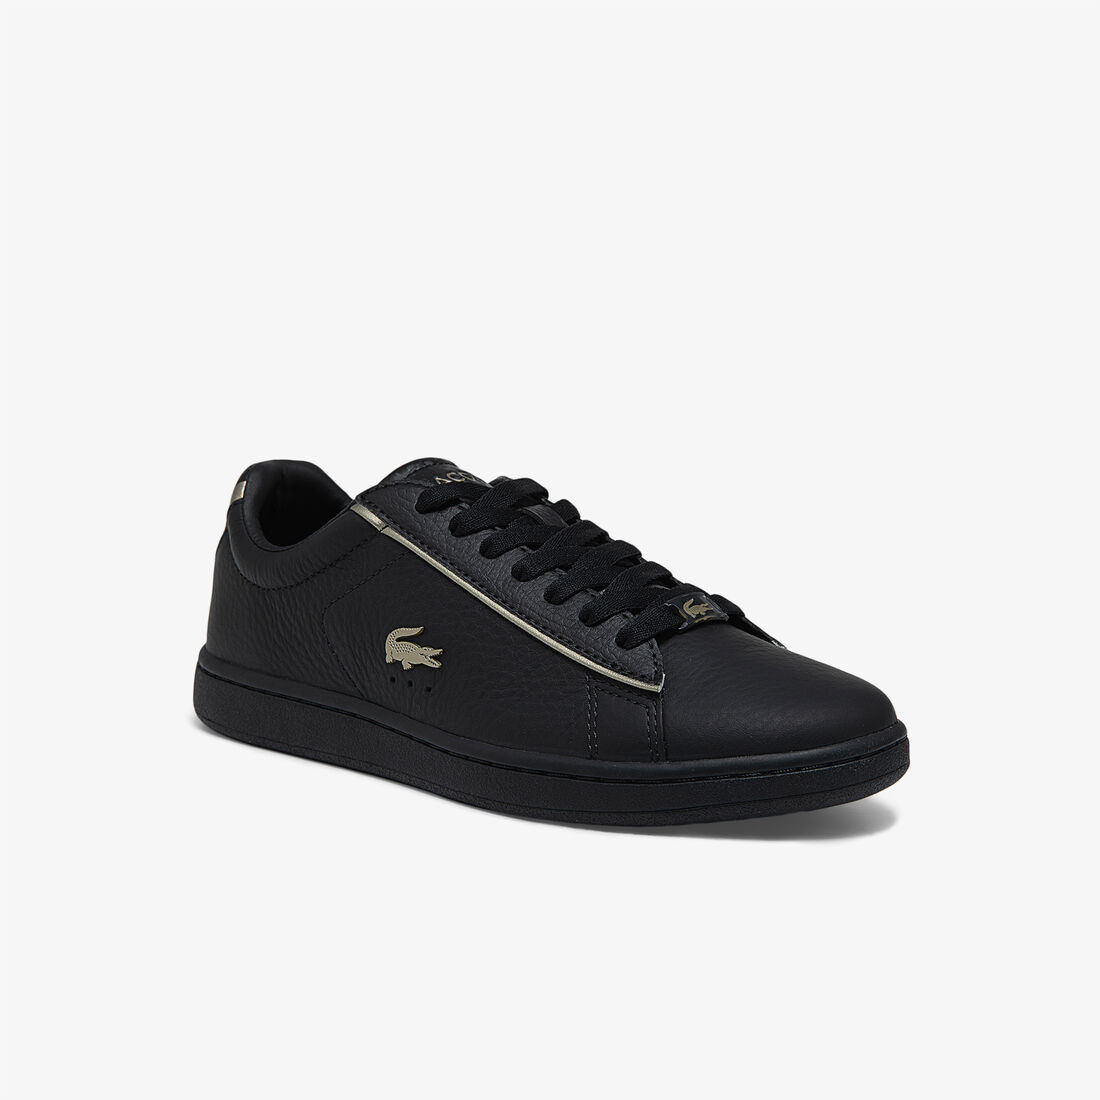 Women's Carnaby Evo Leather Platinum Detailing Sneakers